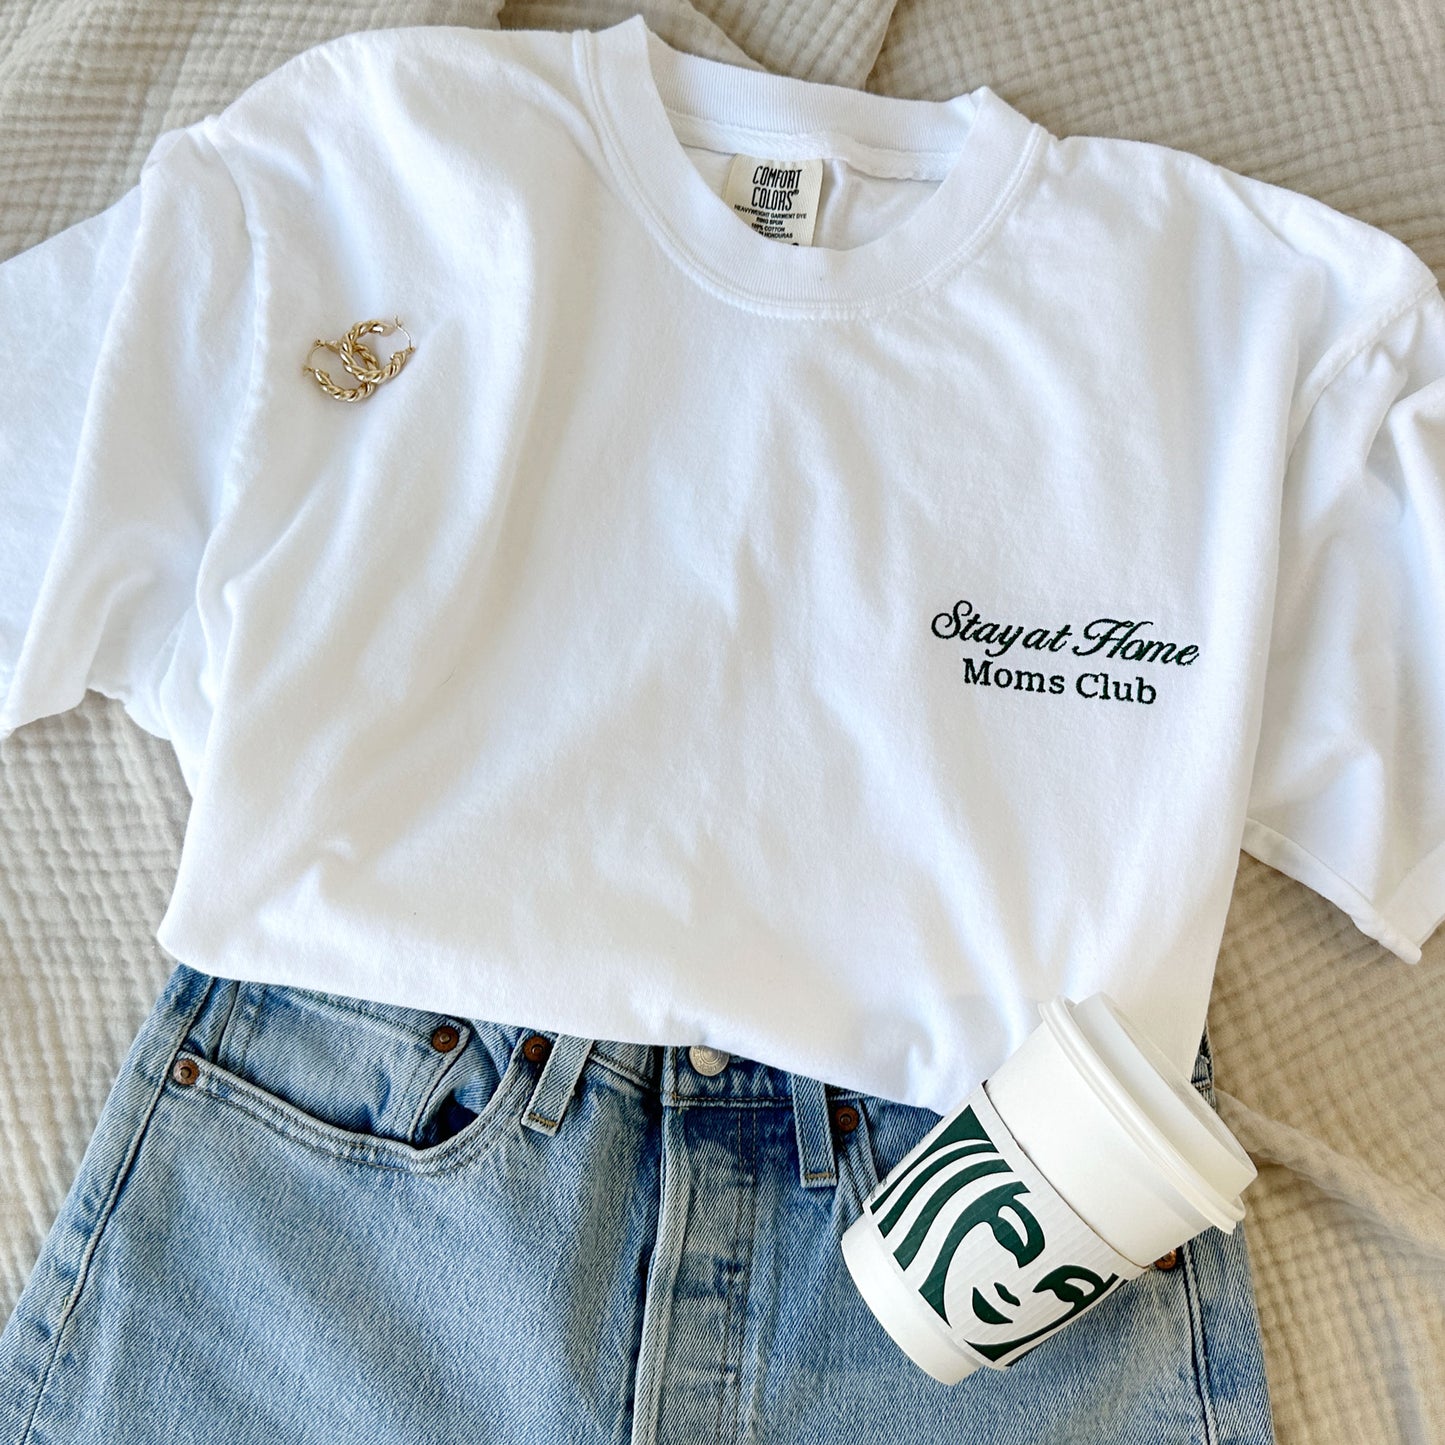 styled flat lay of a white comfort colors tshirt with embroidered stay at home moms club design small on the left chest in hunter green thread with jeans  and a starbucks cup